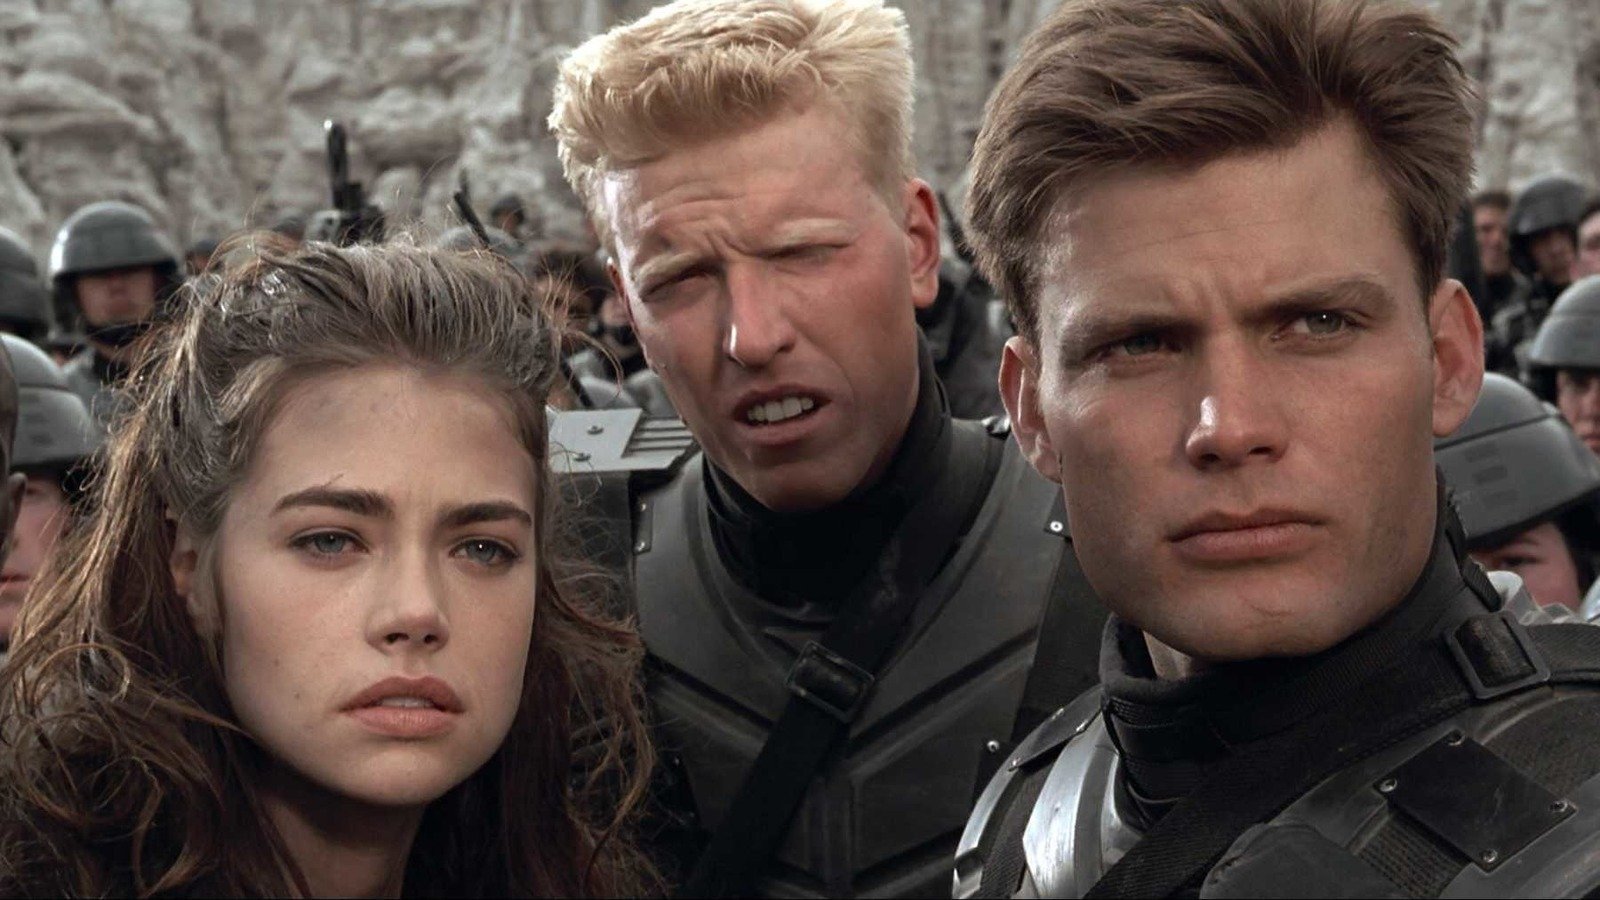 The Starship Troopers Moment That Meant More Than You Realized